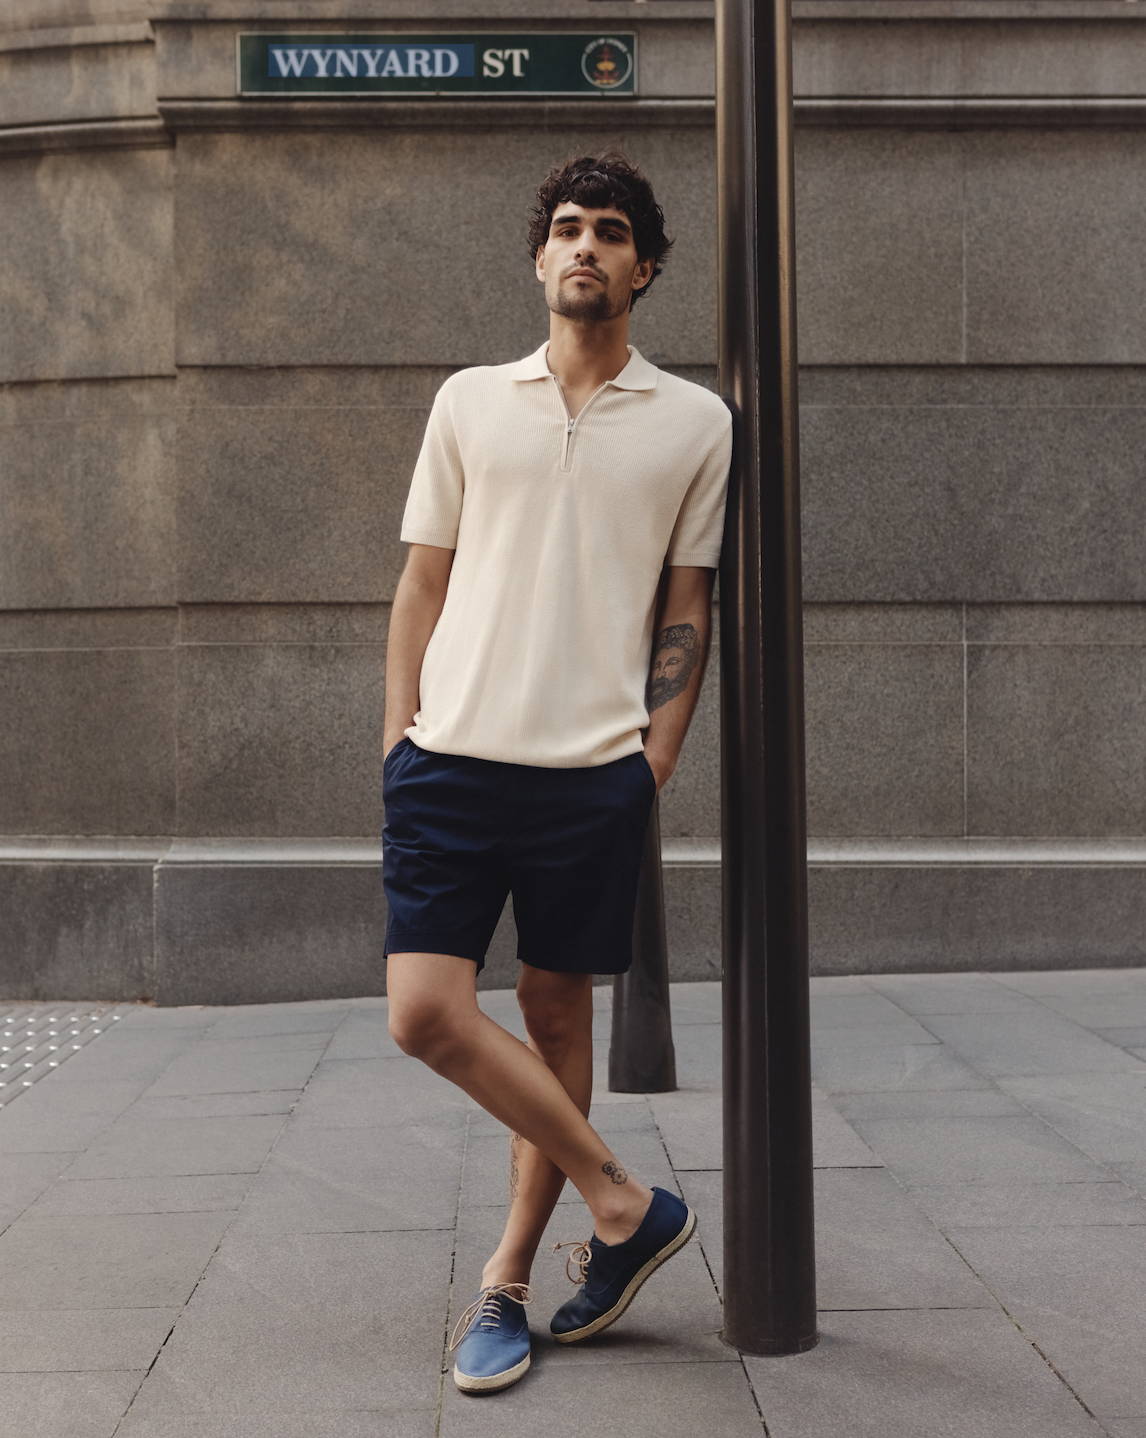 The Best Shoes To Wear With All Your Different Shorts | vlr.eng.br